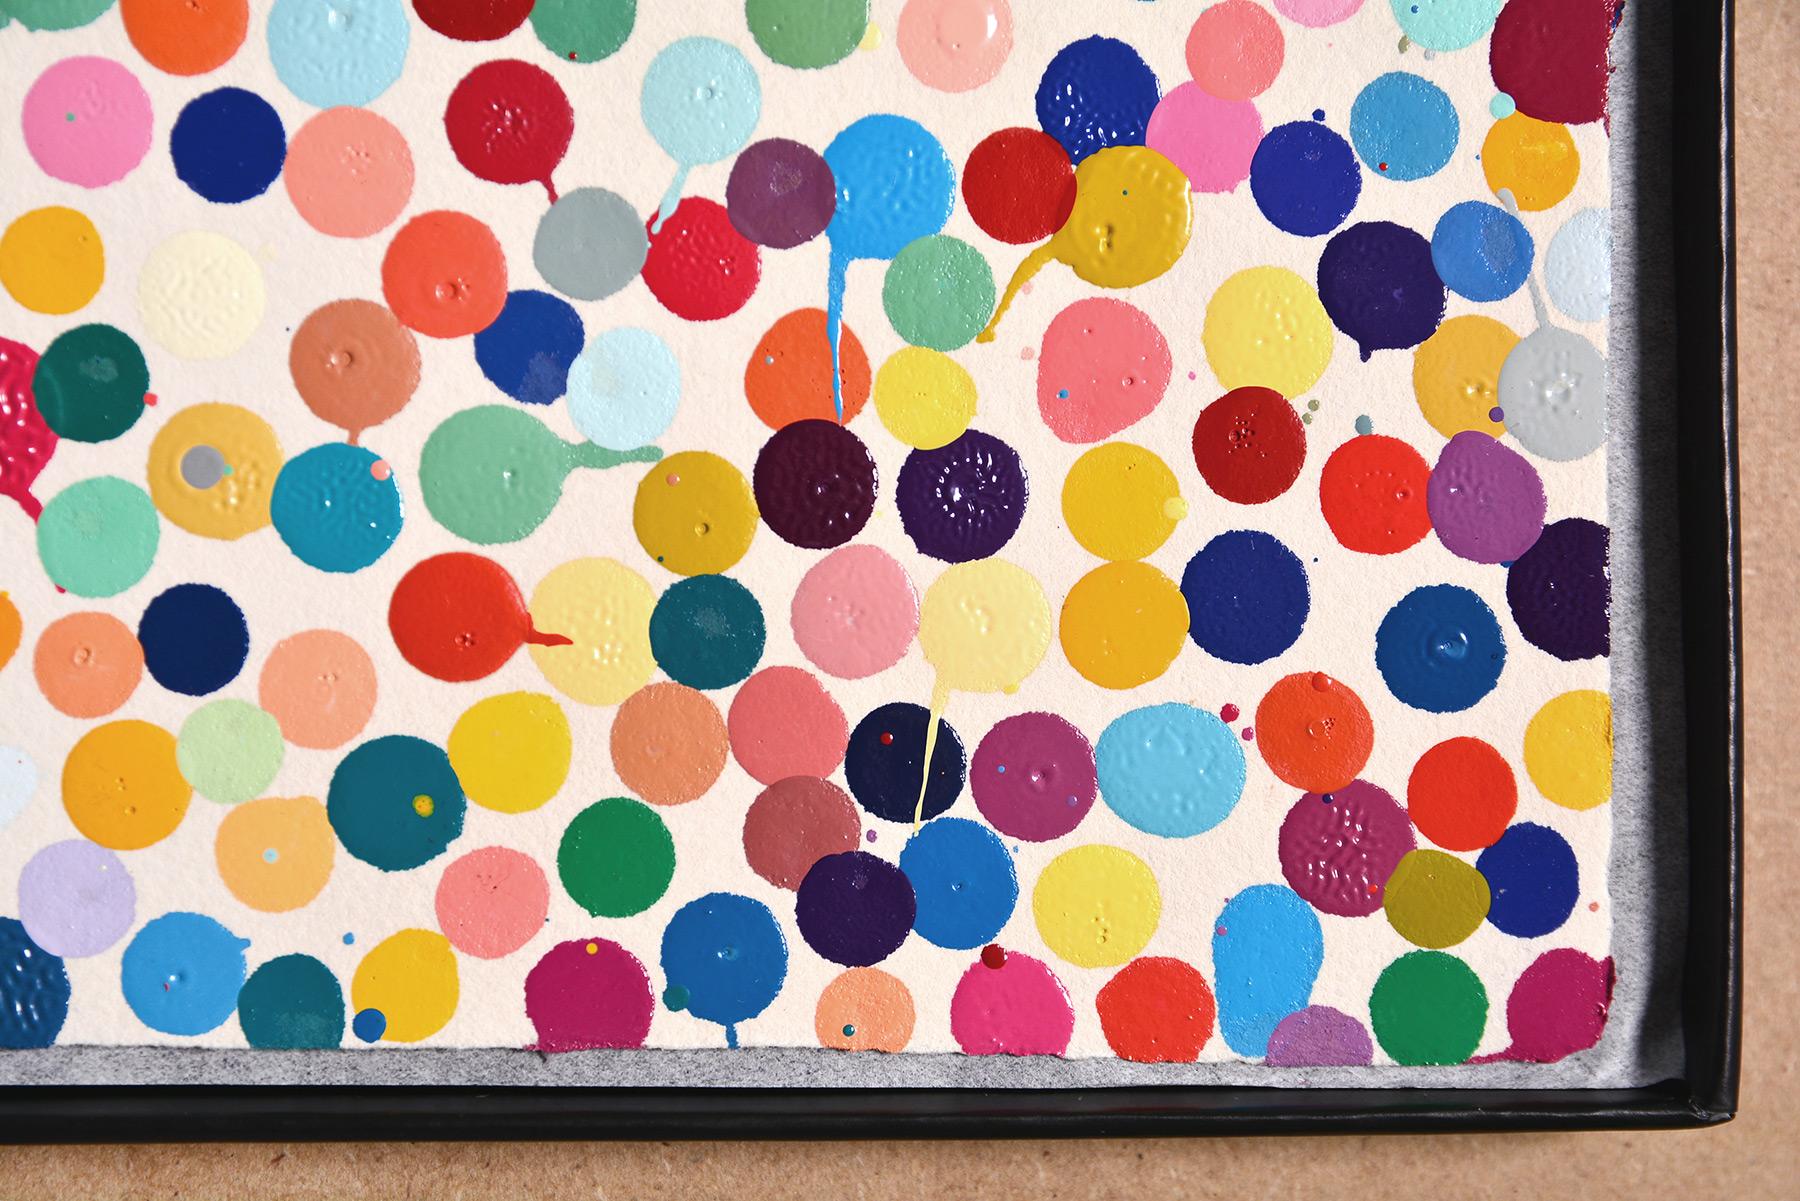 DAMIEN HIRST - THE CURRENCY. Original work The Currency Project. Dots. Colors 2